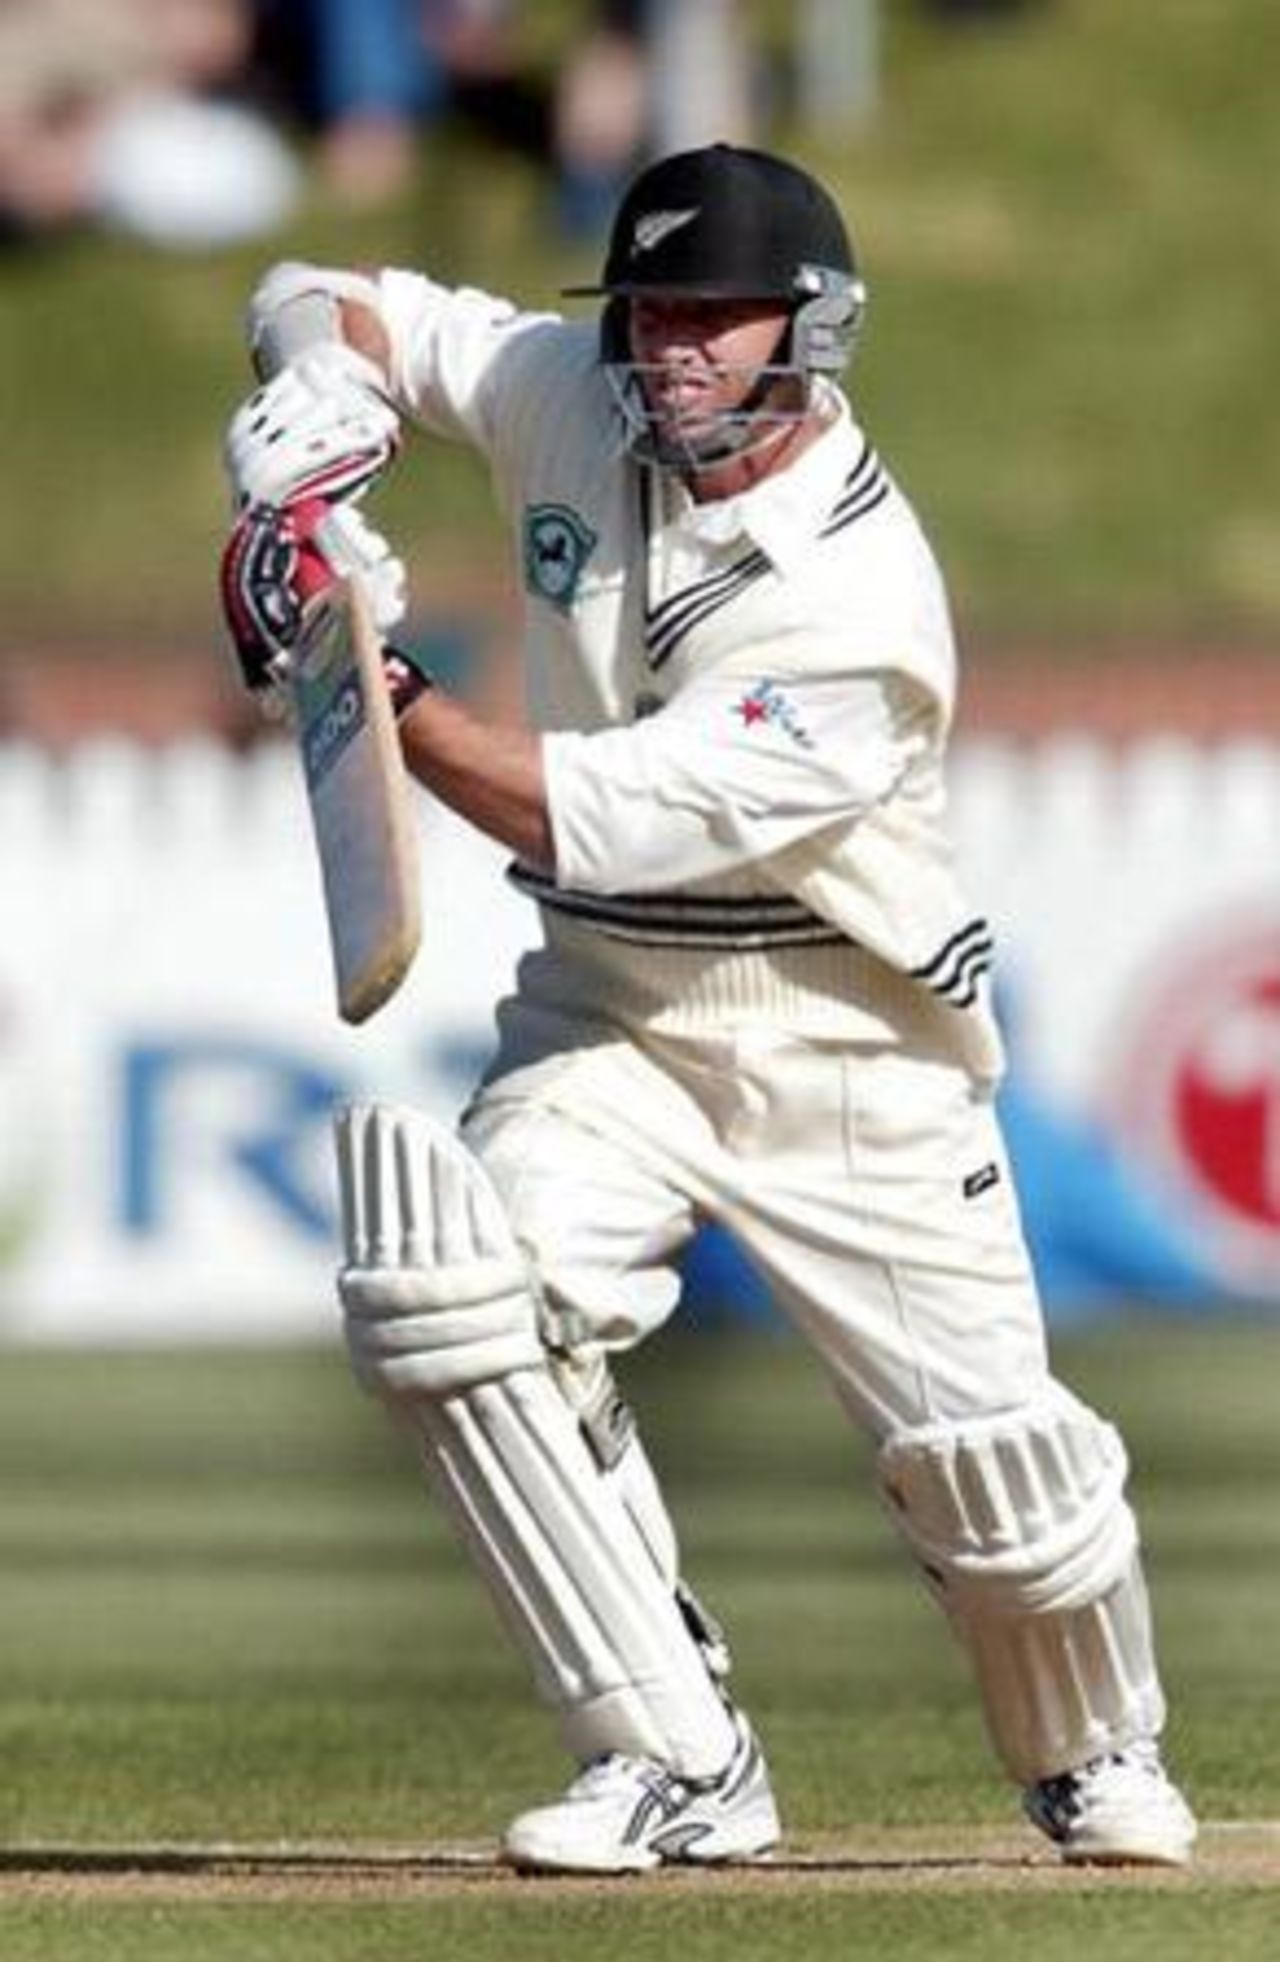 New Zealand batsman Mark Richardson pushes a delivery up towards mid off during his first innings of 83 not out on the second day. 1st Test: New Zealand v India at Basin Reserve, Wellington, 12-16 December 2002 (13 December 2002).